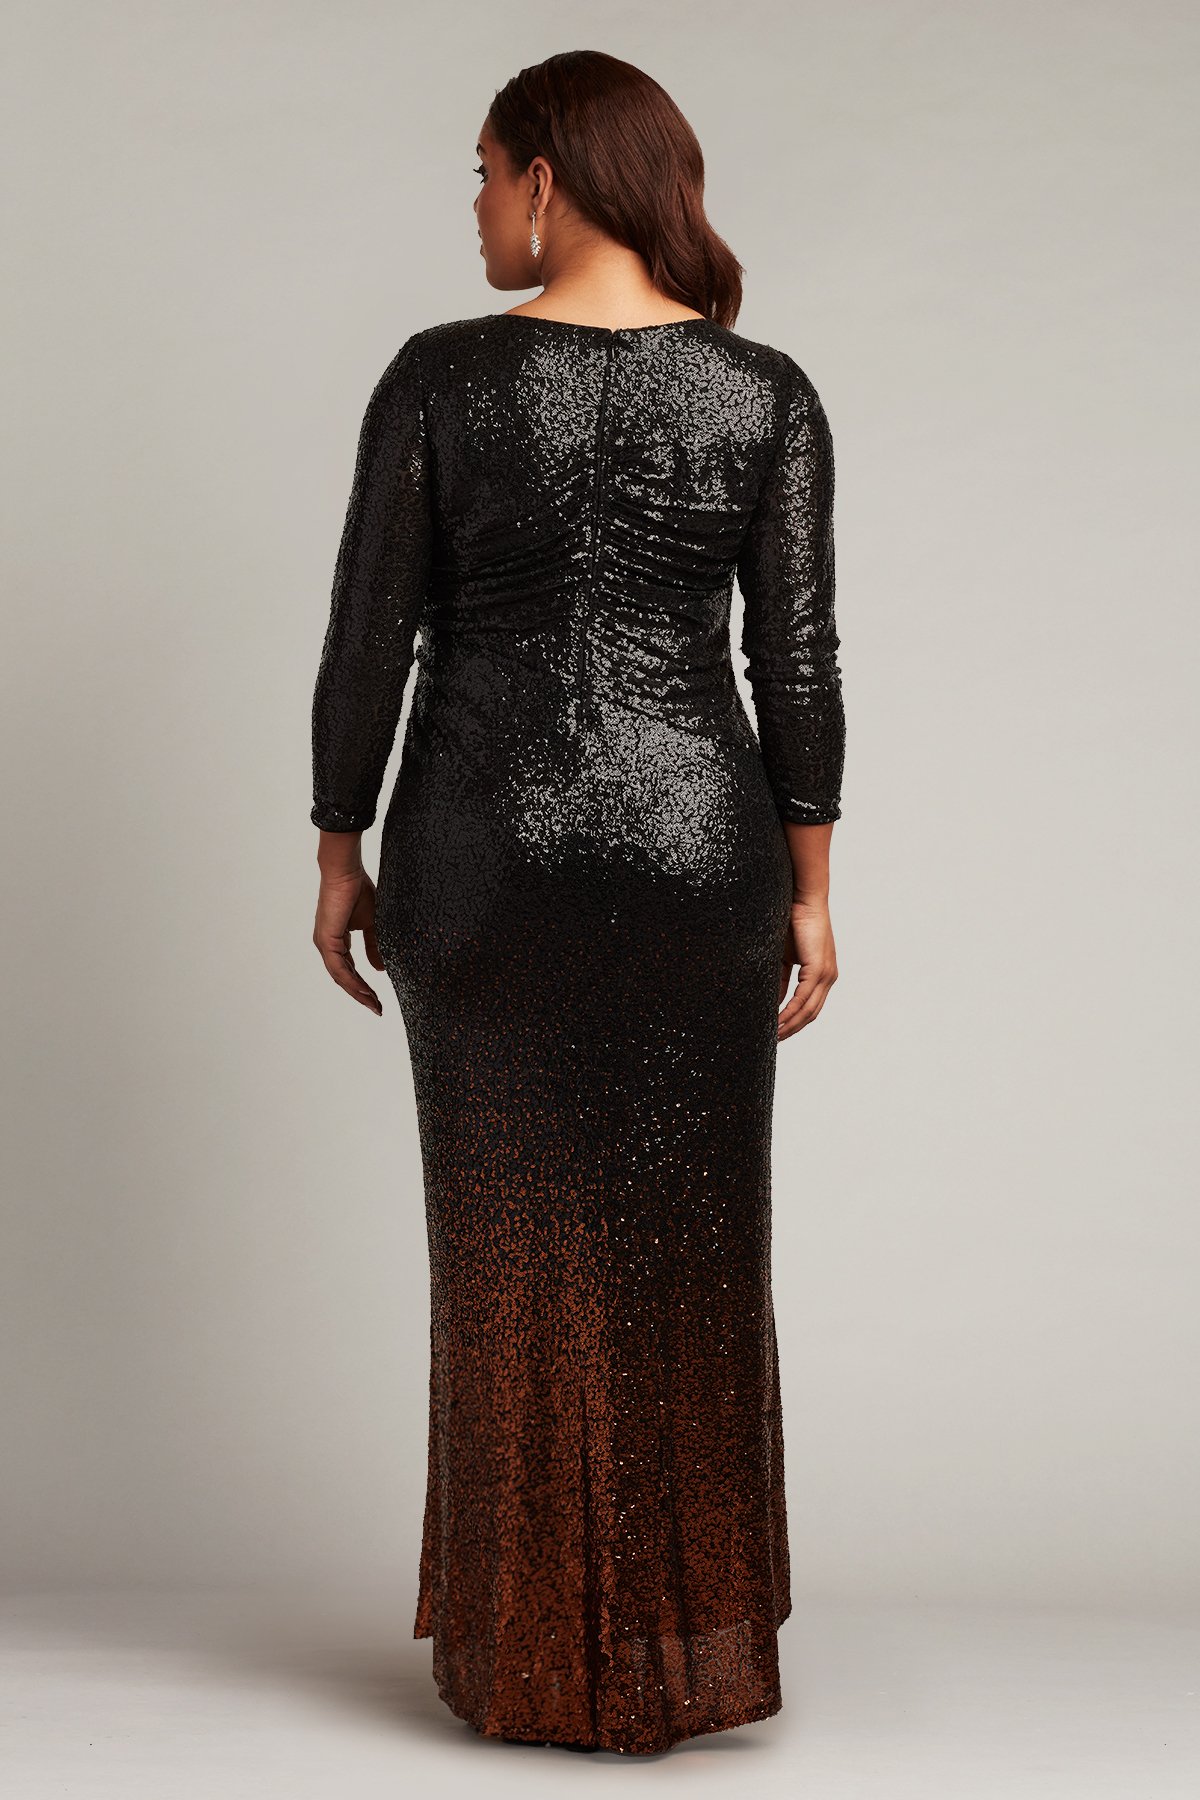 Gili Long-Sleeve Sequin Slit Gown - PLUS SIZE